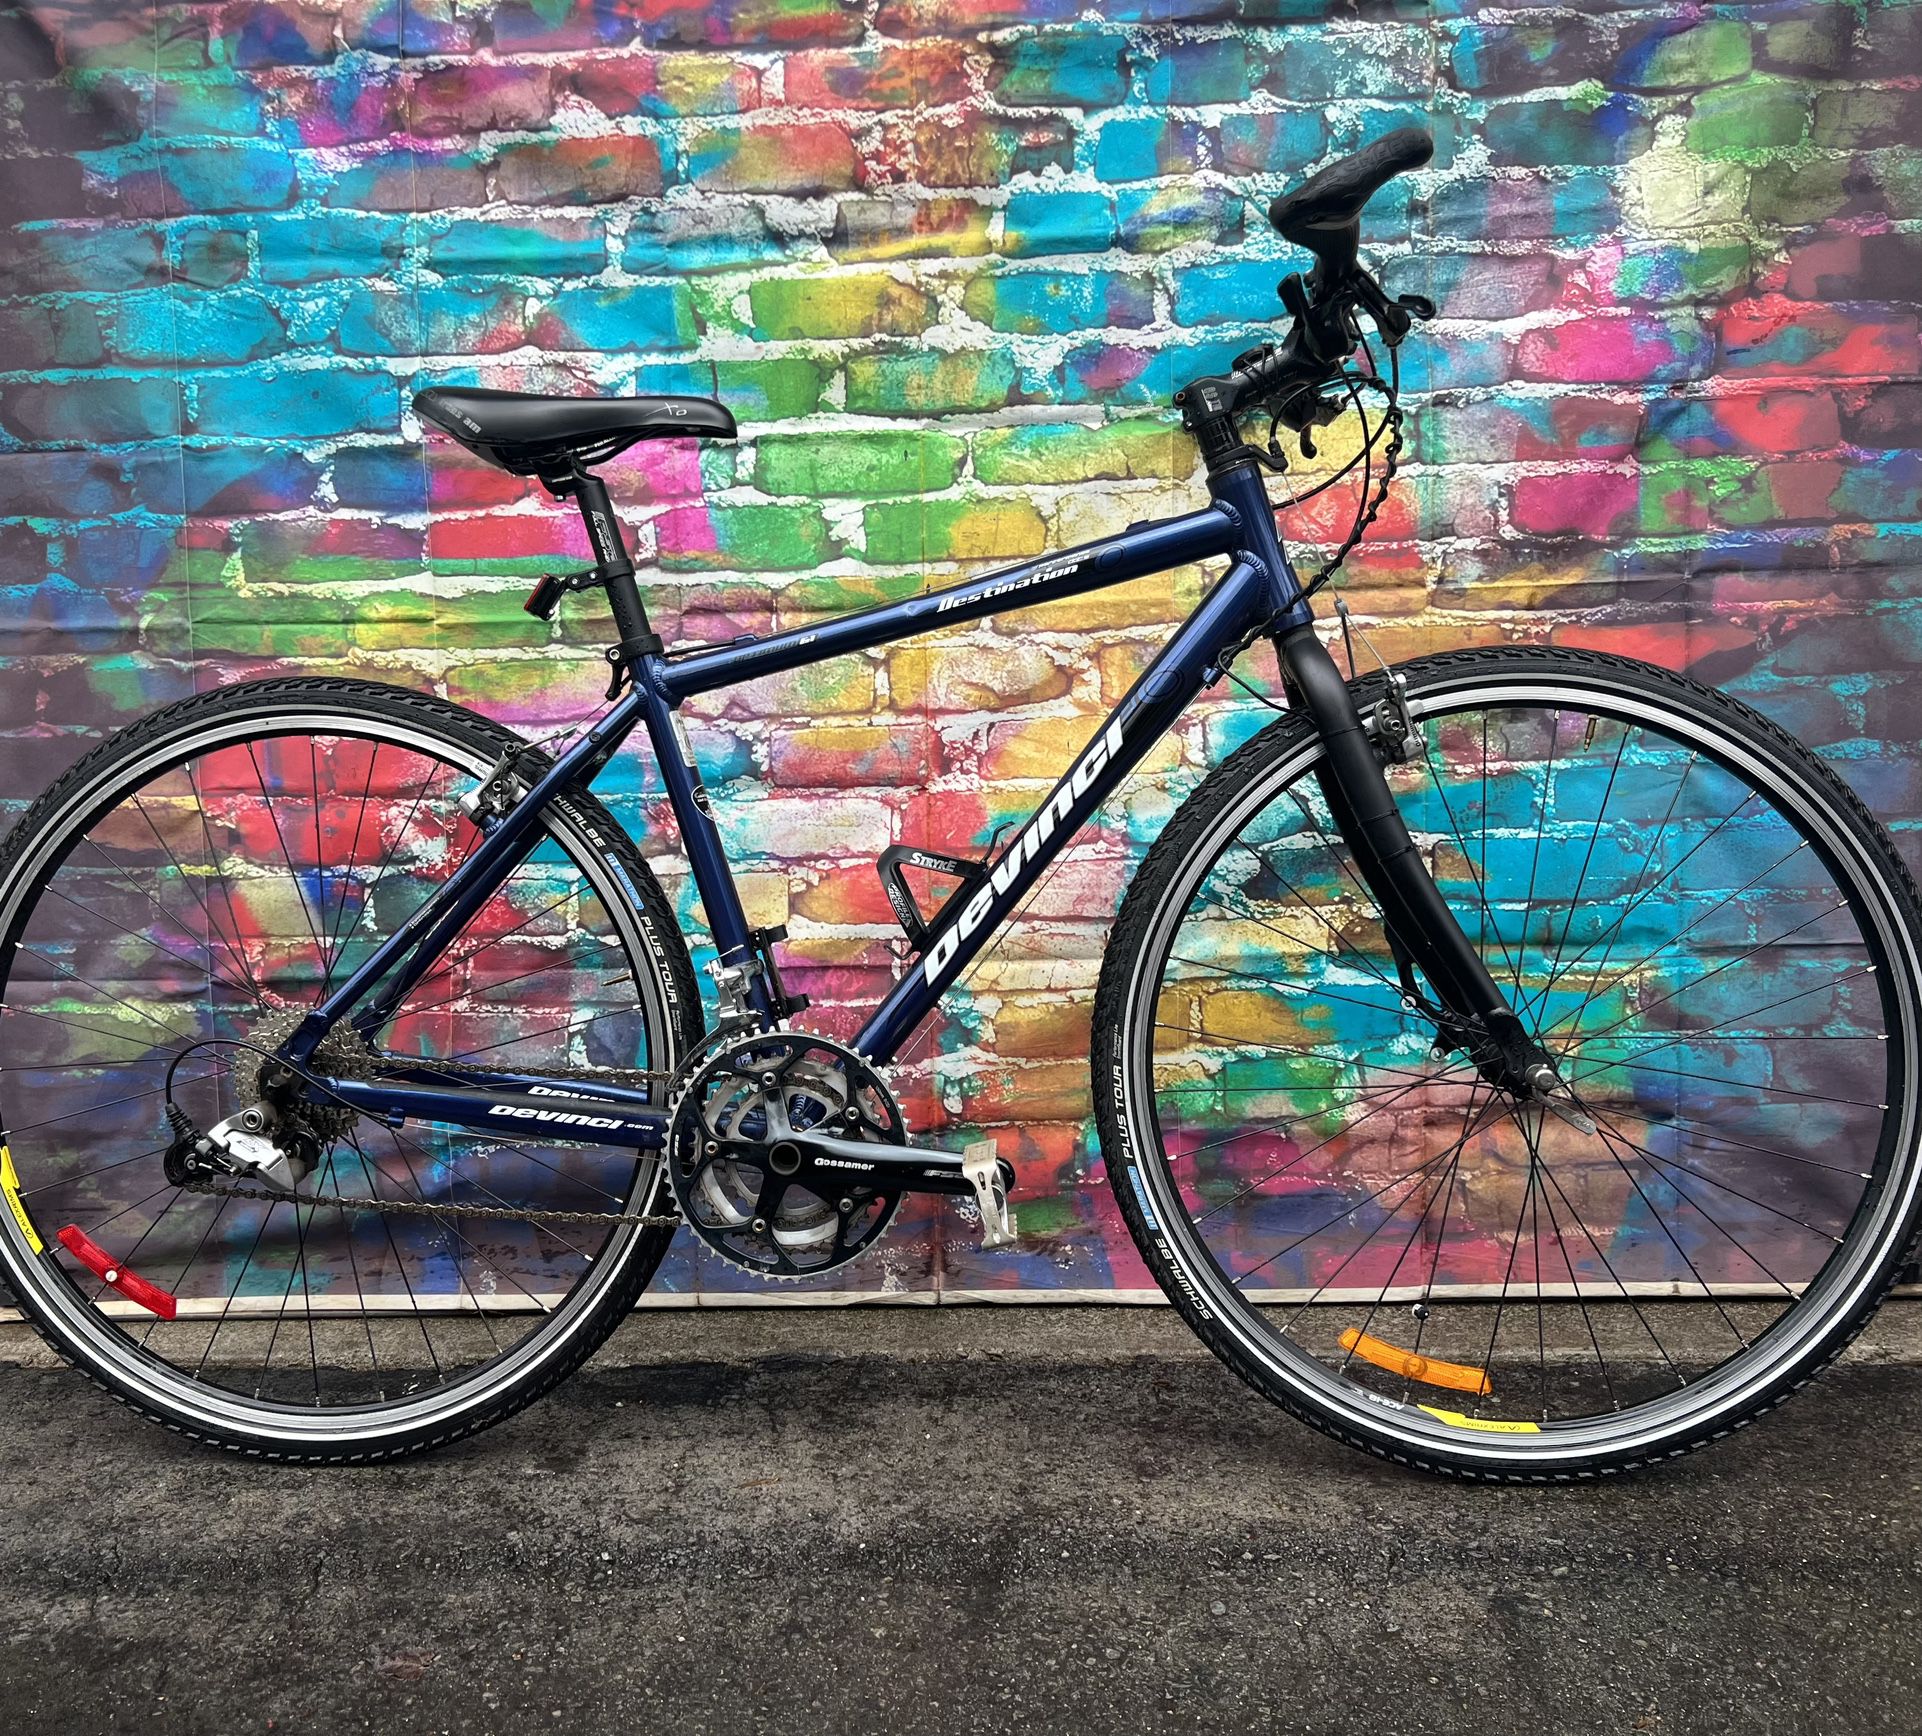 Like new! "Devinci Destination Dot 5: Like-New Bicycle with Upgraded Tires - Ready for Your Next Adventure!"